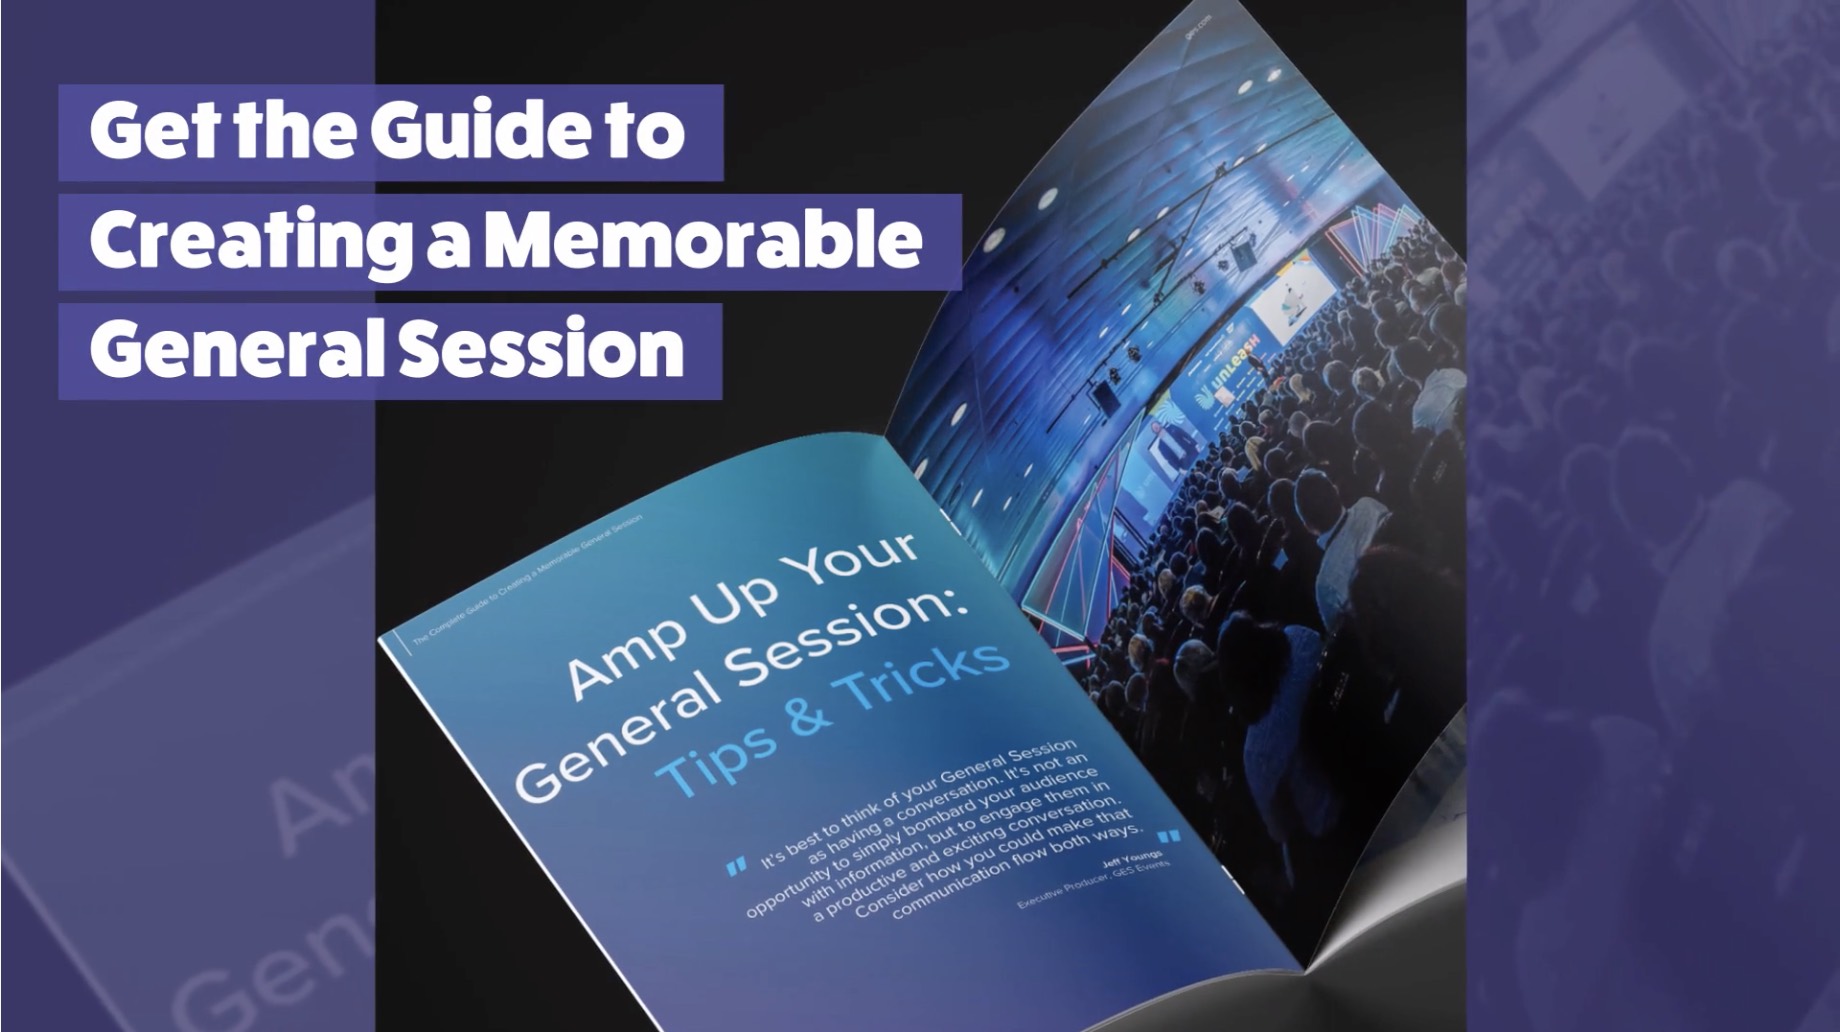 video, get the guide to creating a memorable general session